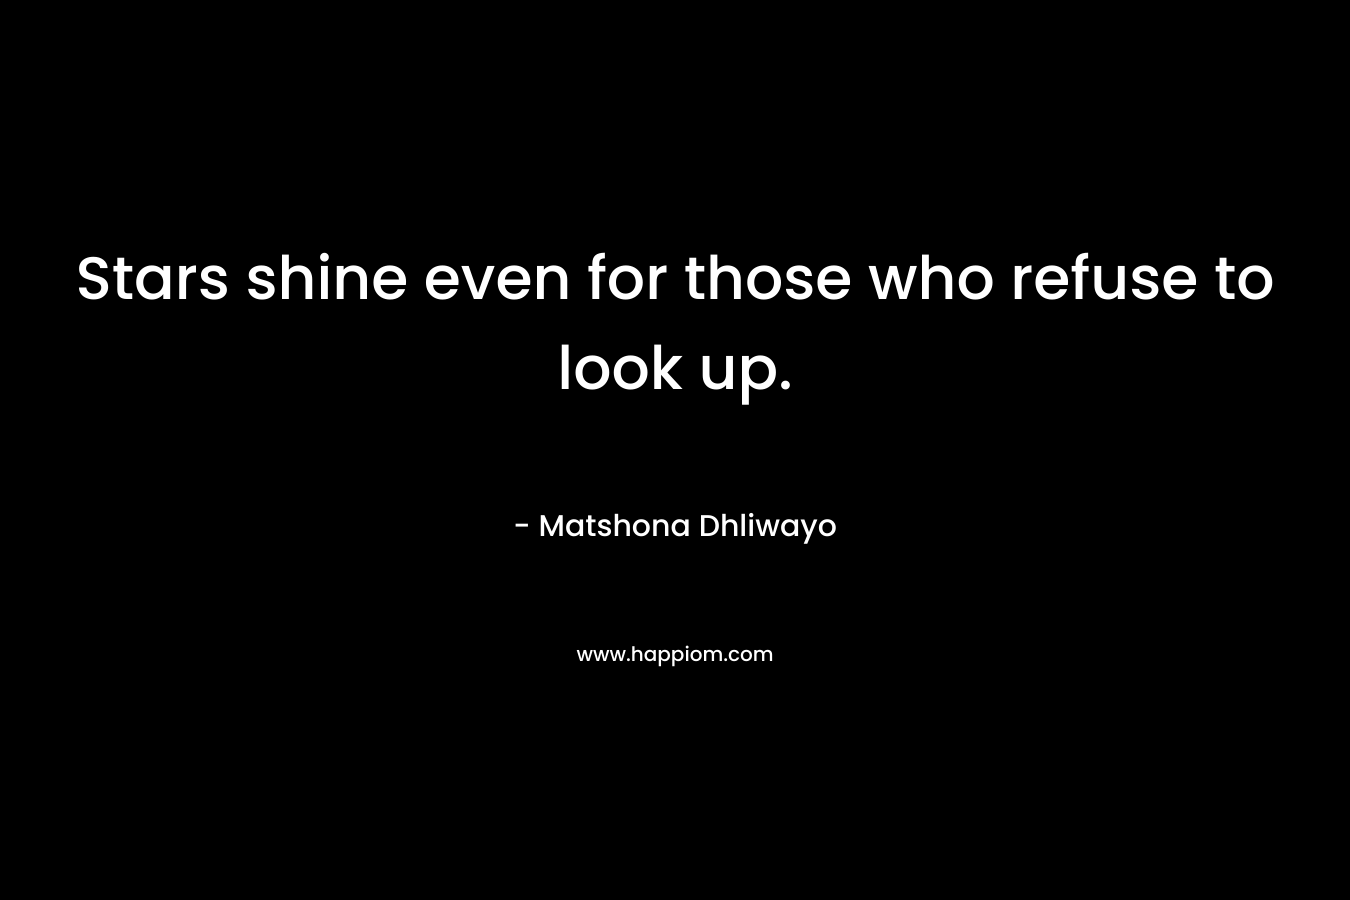 Stars shine even for those who refuse to look up.